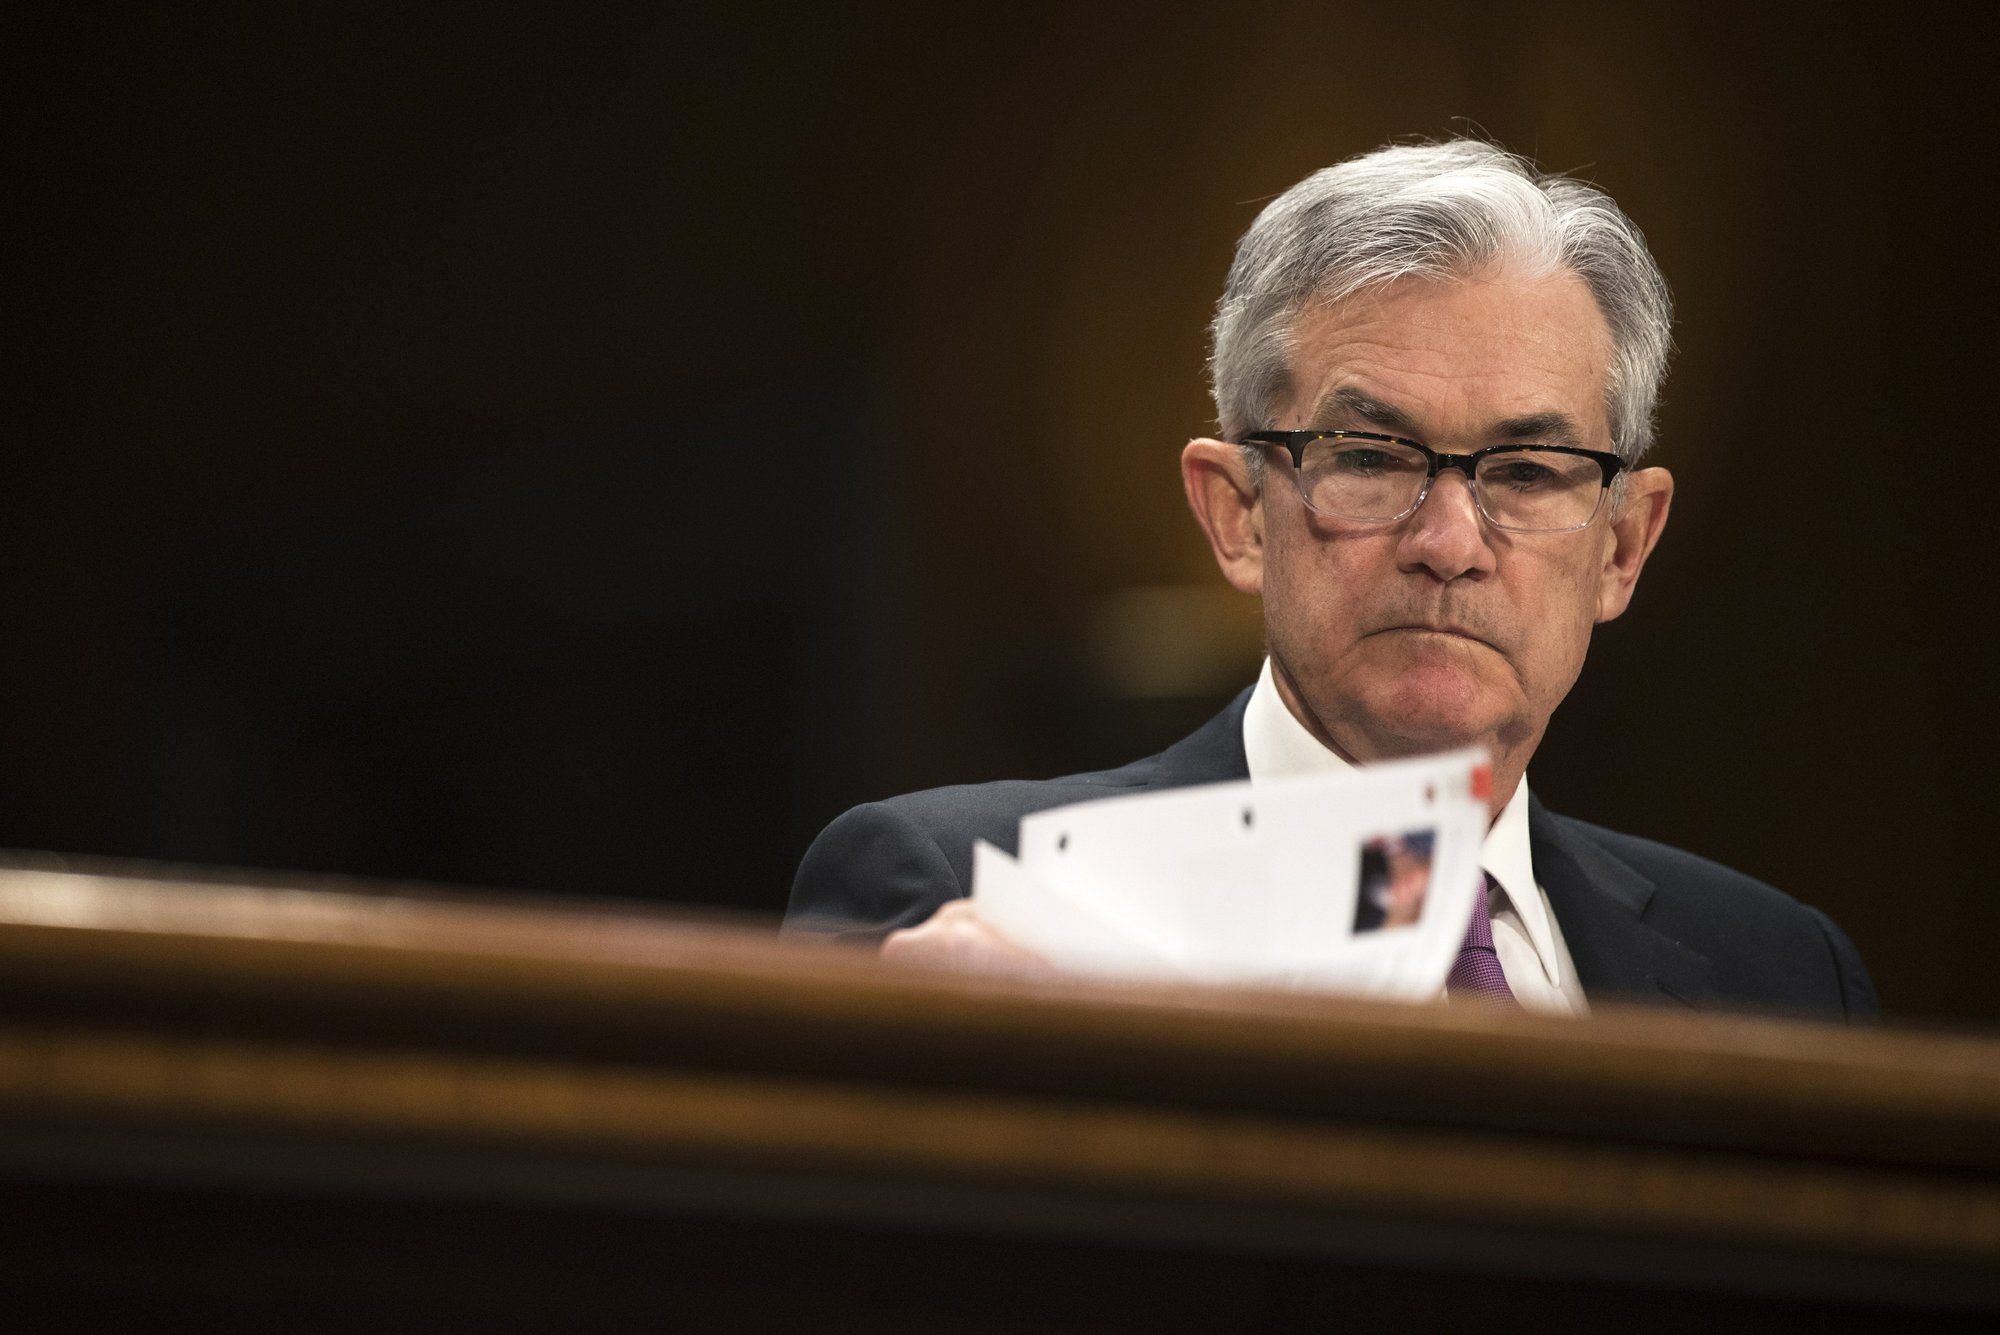 FILE- In this Feb. 26, 2019, file photo Federal Reserve Chairman Jerome Powell testifies before the Senate Banking, Housing and Urban Affairs Committee on monetary policy on Capitol Hill in Washington. On Wednesday, March 20, the Federal Reserve releases its latest monetary policy statement after a two-day meeting. (AP Photo/Kevin Wolf, File)